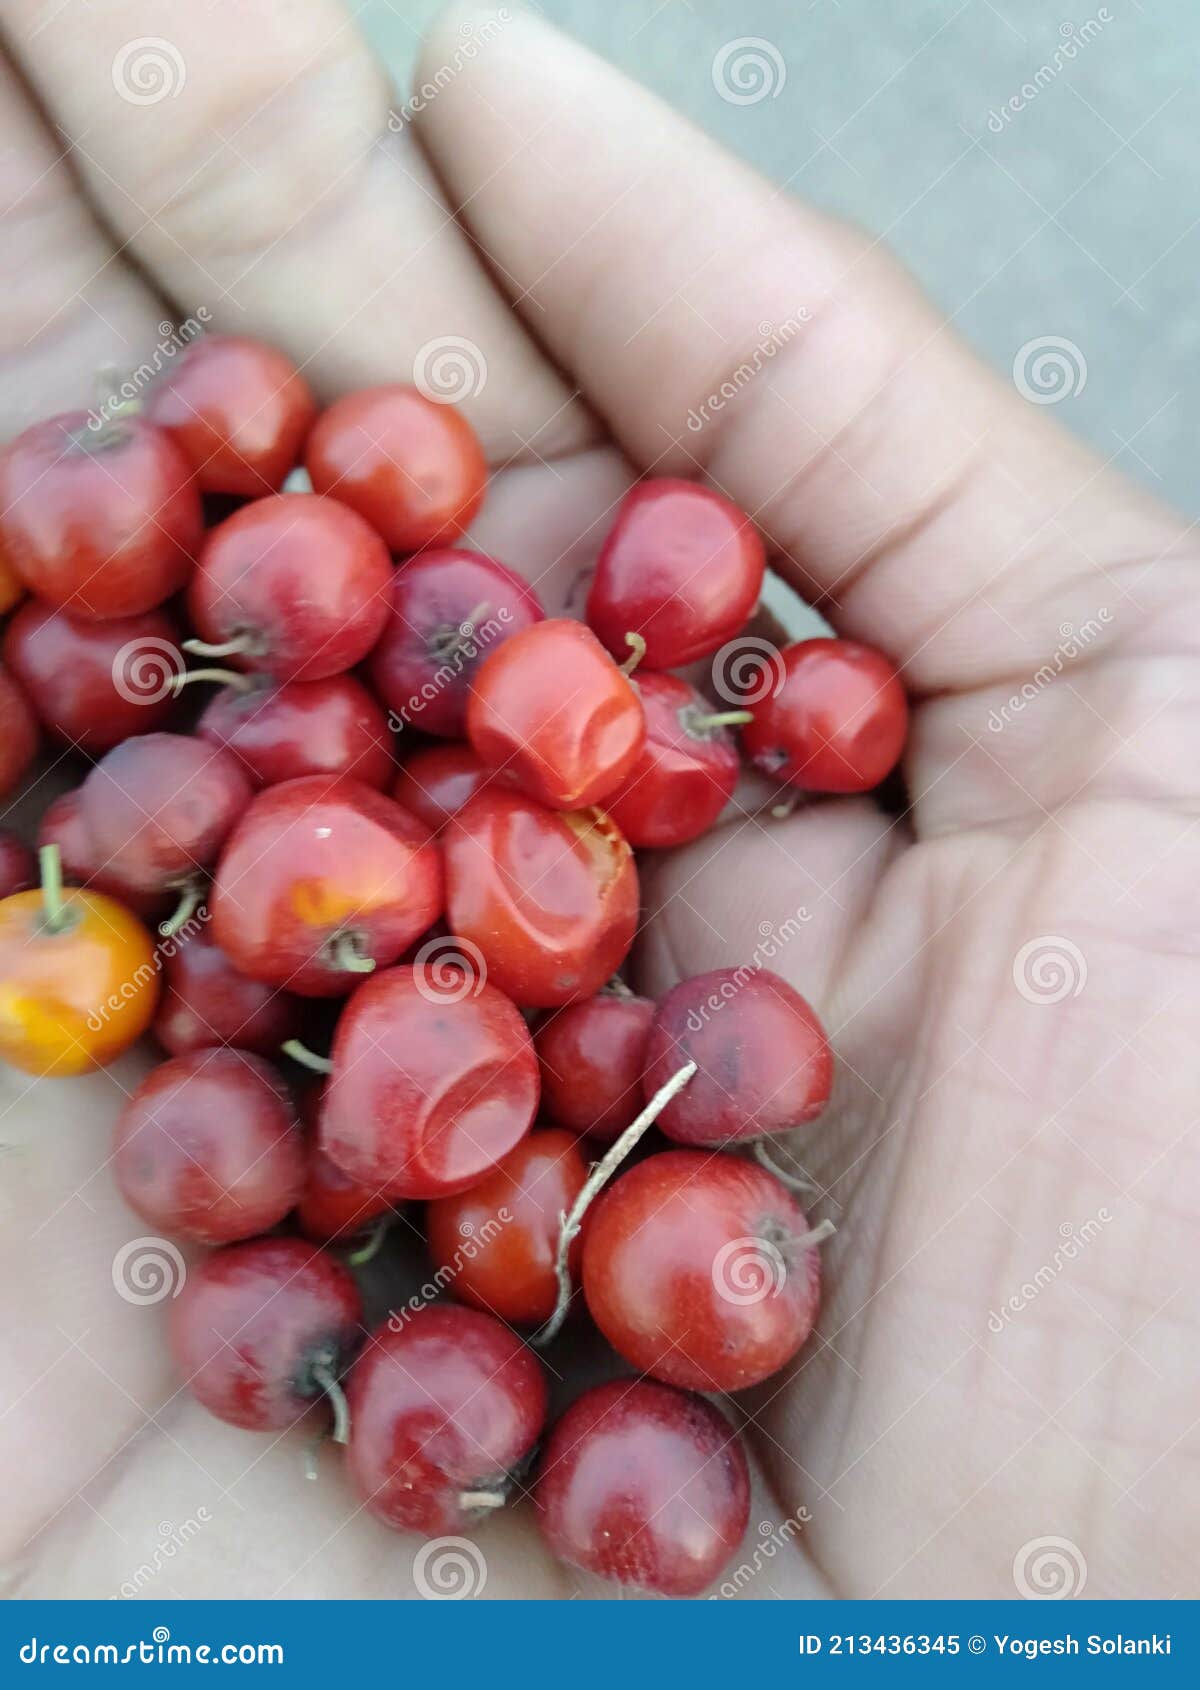 frut in the hands of an indian parsons